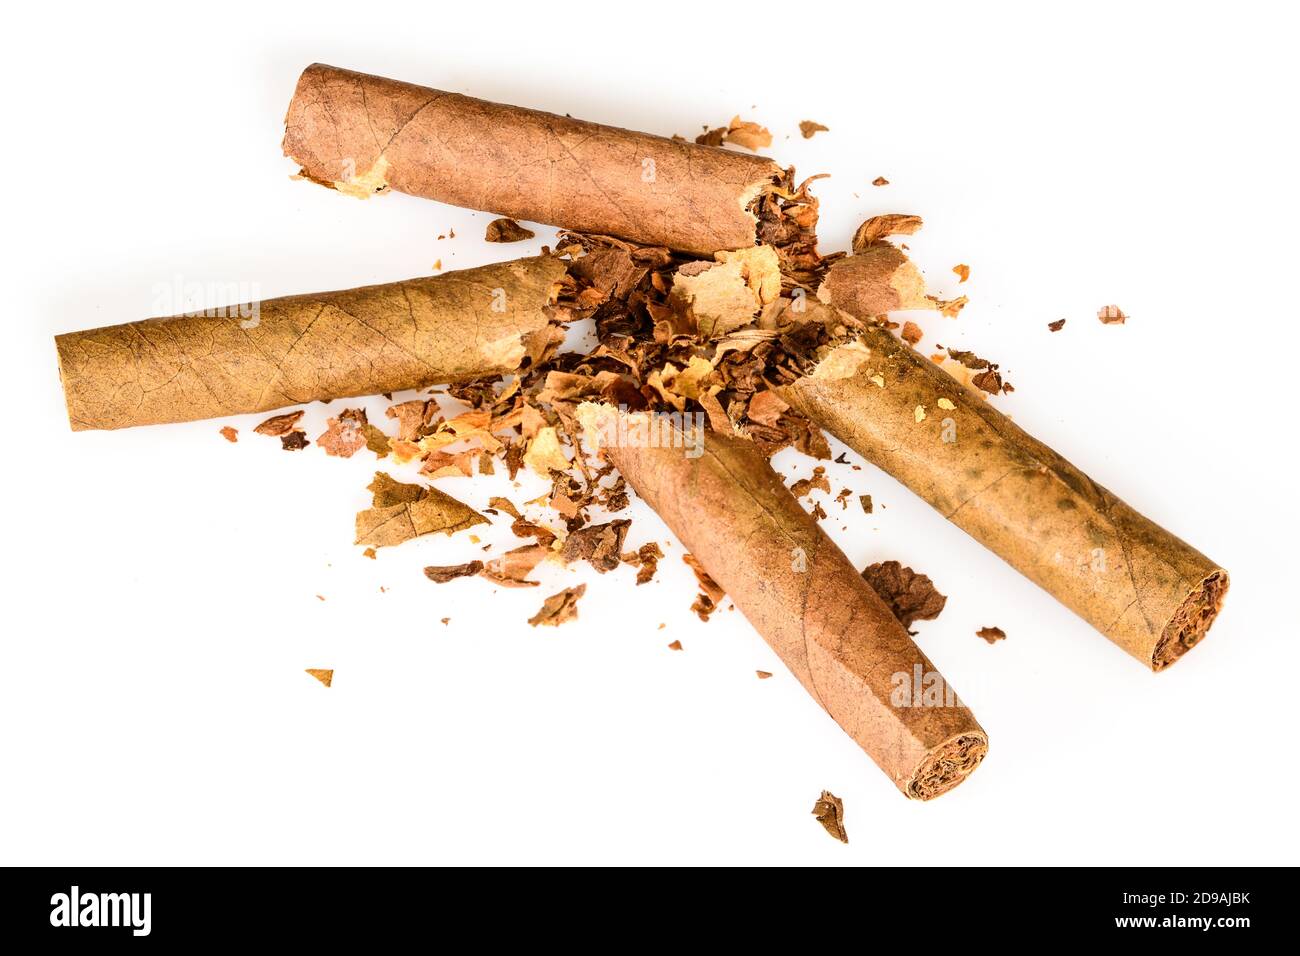 Broken two tobacco cigarillos as a concept of quitting smoking. World No Tobacco Day. Isolated on white background, close up high resolution. Stock Photo